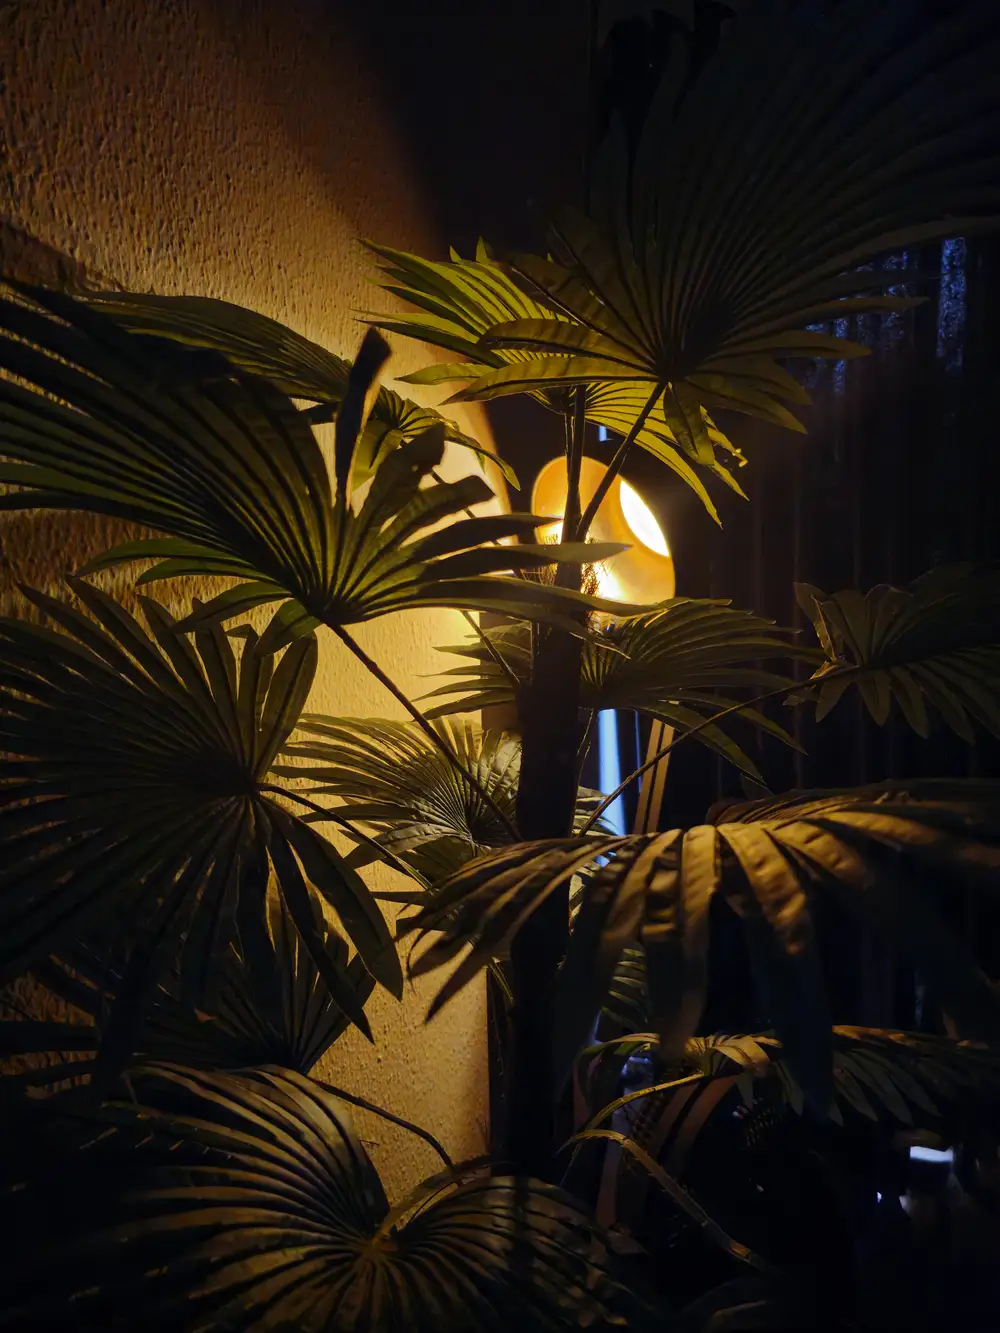 A plant and a lamp